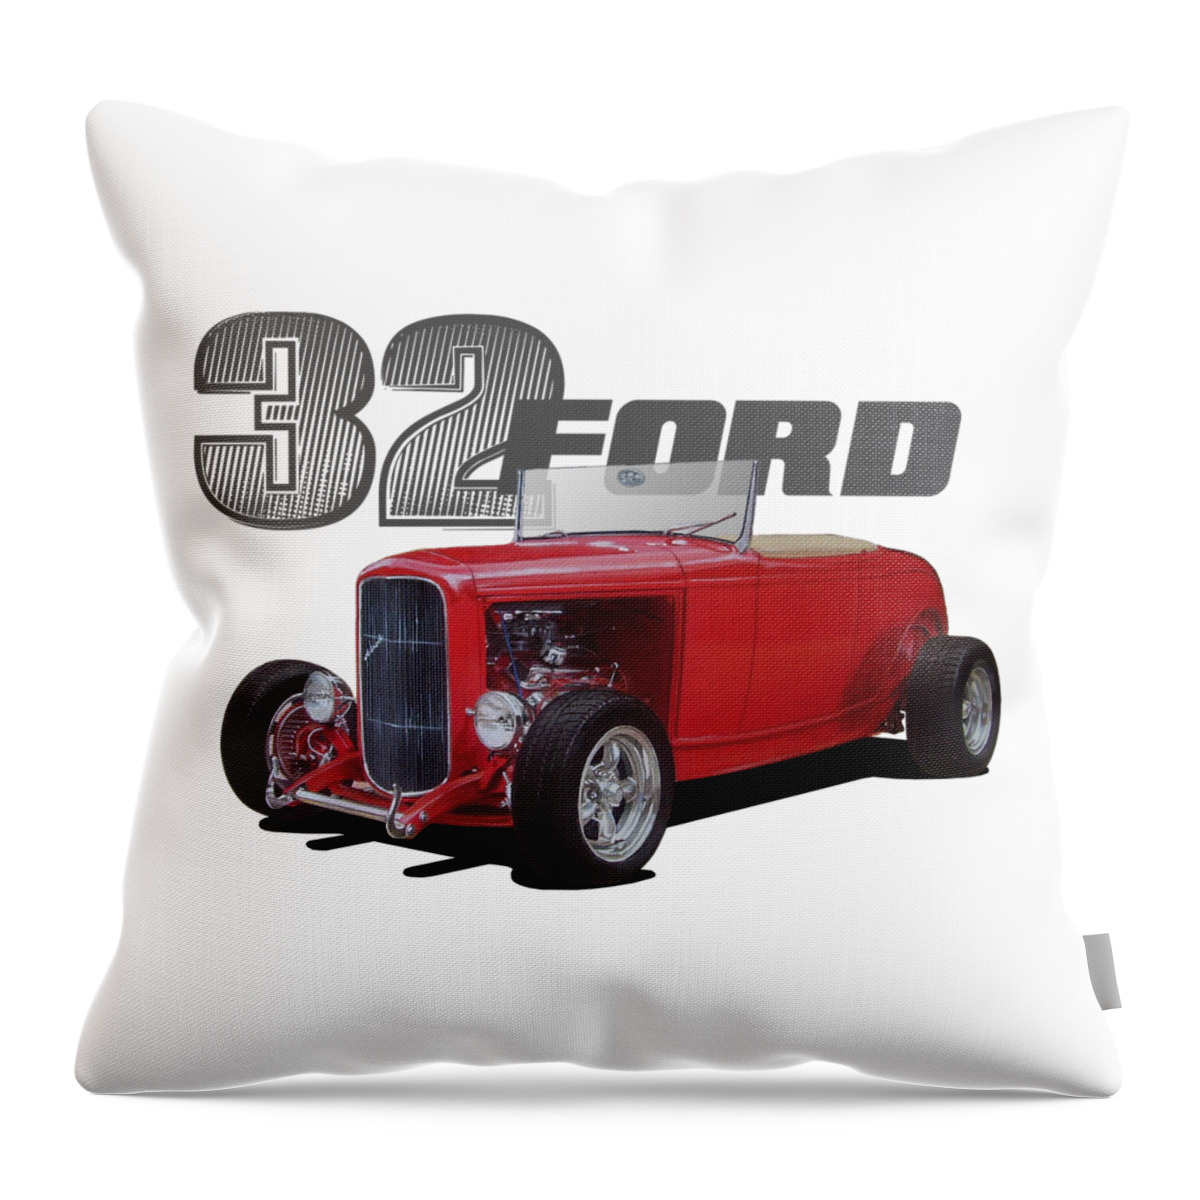 32 Ford Throw Pillow featuring the digital art 1932 Red Ford by Paul Kuras